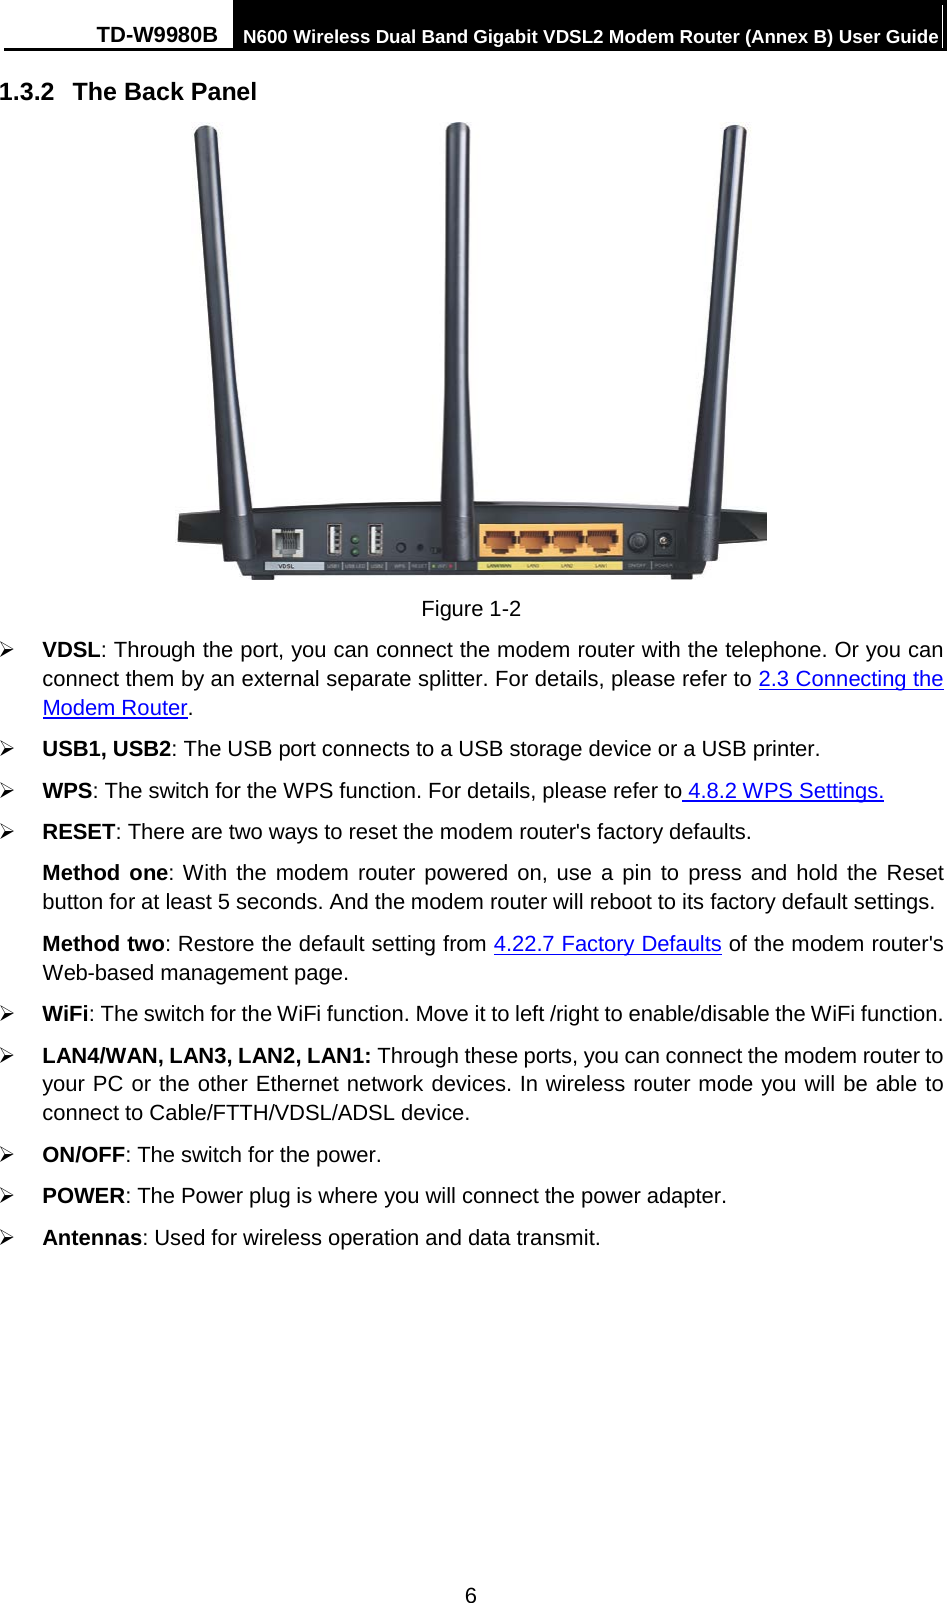 TD-W9980B N600 Wireless Dual Band Gigabit VDSL2 Modem Router (Annex B) User Guide  1.3.2 The Back Panel  Figure 1-2  VDSL: Through the port, you can connect the modem router with the telephone. Or you can connect them by an external separate splitter. For details, please refer to 2.3 Connecting the Modem Router.    USB1, USB2: The USB port connects to a USB storage device or a USB printer.  WPS: The switch for the WPS function. For details, please refer to 4.8.2 WPS Settings.  RESET: There are two ways to reset the modem router&apos;s factory defaults.   Method one: With the modem router powered on, use a pin to press and hold the Reset button for at least 5 seconds. And the modem router will reboot to its factory default settings. Method two: Restore the default setting from 4.22.7 Factory Defaults of the modem router&apos;s Web-based management page.  WiFi: The switch for the WiFi function. Move it to left /right to enable/disable the WiFi function.  LAN4/WAN, LAN3, LAN2, LAN1: Through these ports, you can connect the modem router to your PC or the other Ethernet network devices. In wireless router mode you will be able to connect to Cable/FTTH/VDSL/ADSL device.  ON/OFF: The switch for the power.  POWER: The Power plug is where you will connect the power adapter.  Antennas: Used for wireless operation and data transmit. 6 